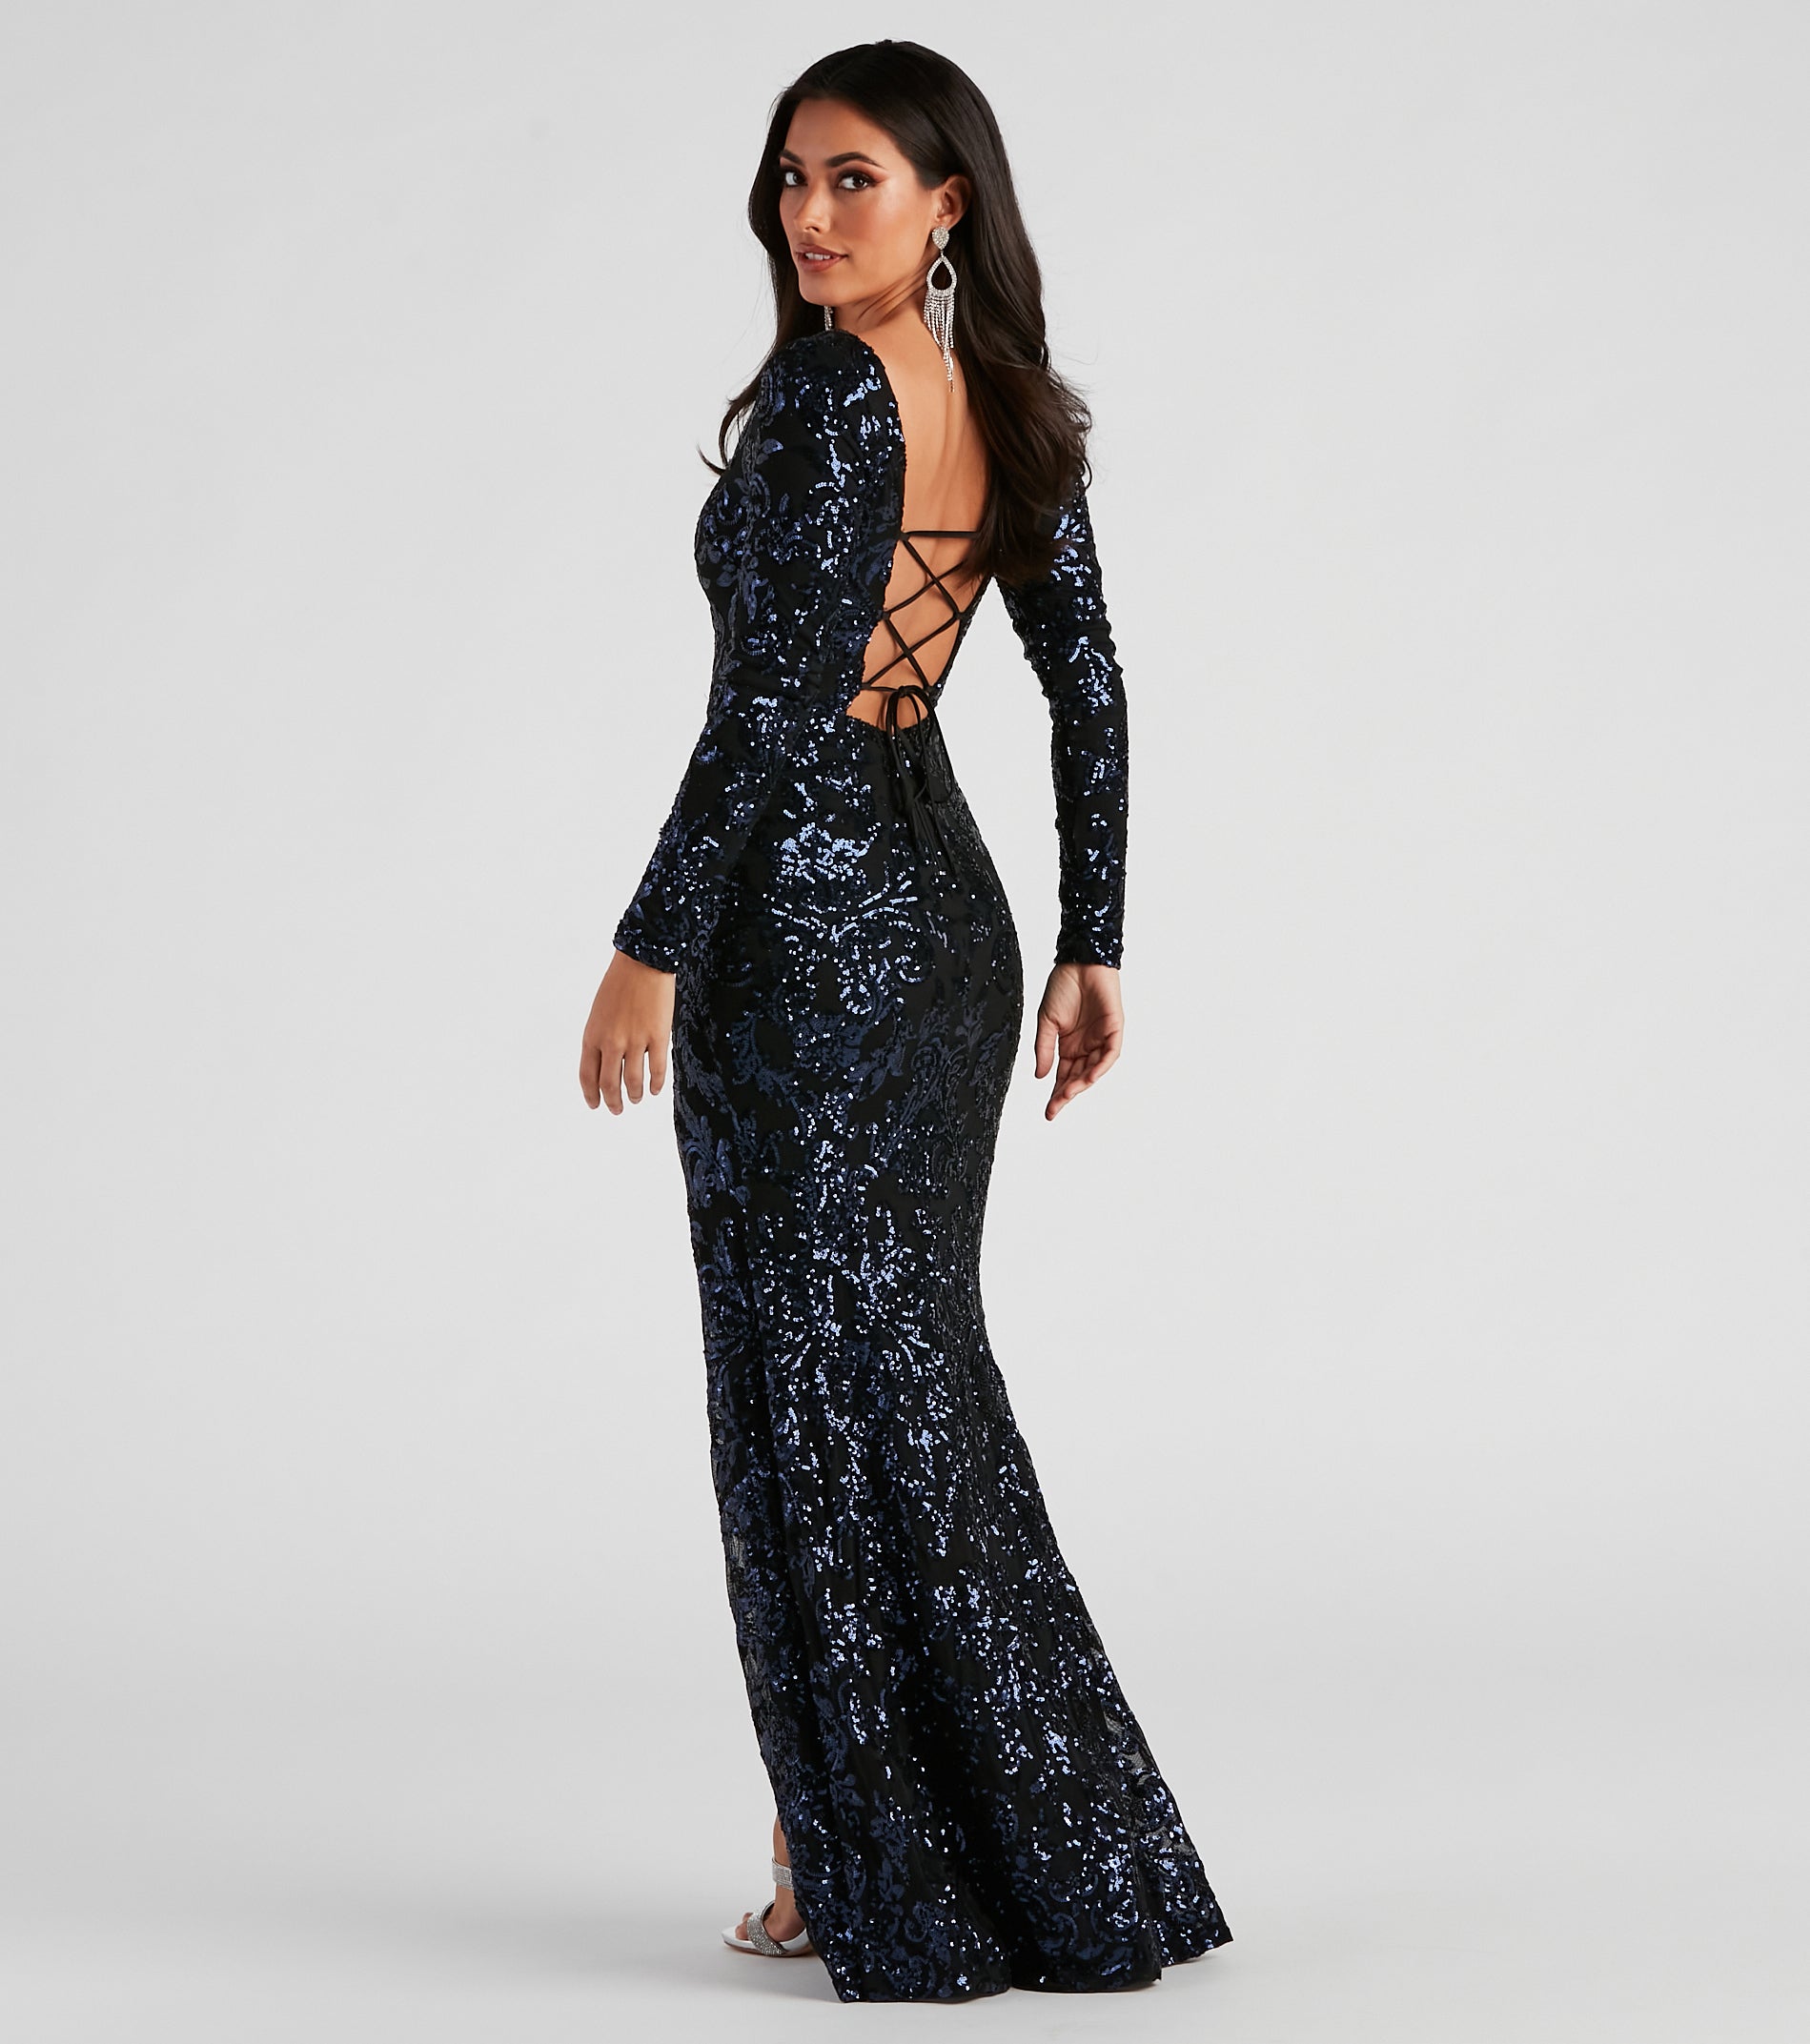 Arial Formal Sequin Lace-Up Dress